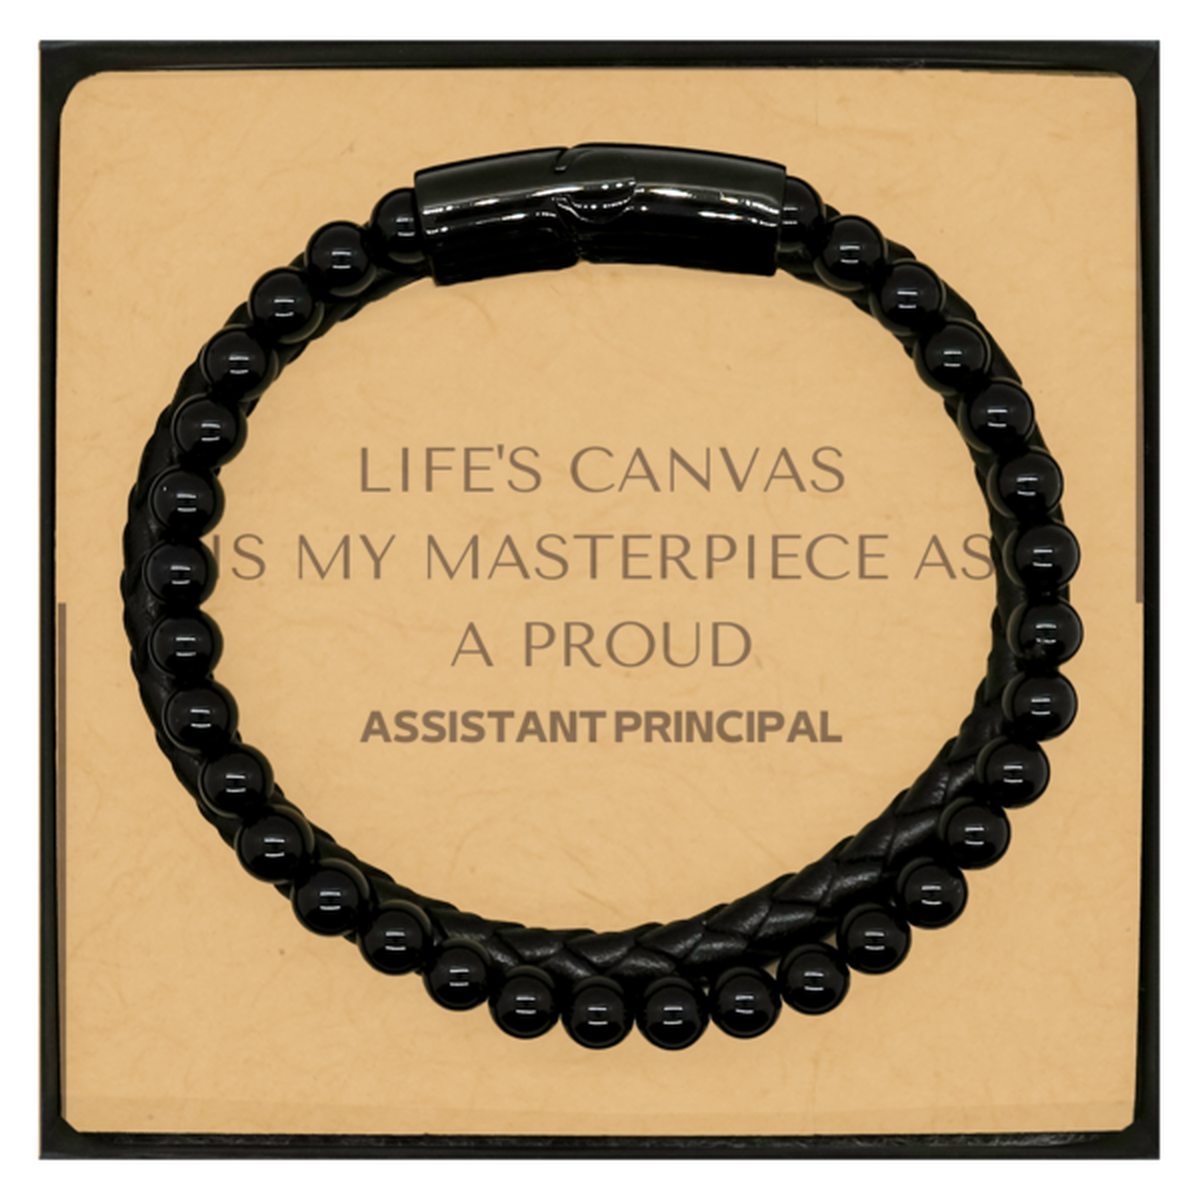 Proud Assistant Principal Gifts, Life's canvas is my masterpiece, Epic Birthday Christmas Unique Stone Leather Bracelets For Assistant Principal, Coworkers, Men, Women, Friends